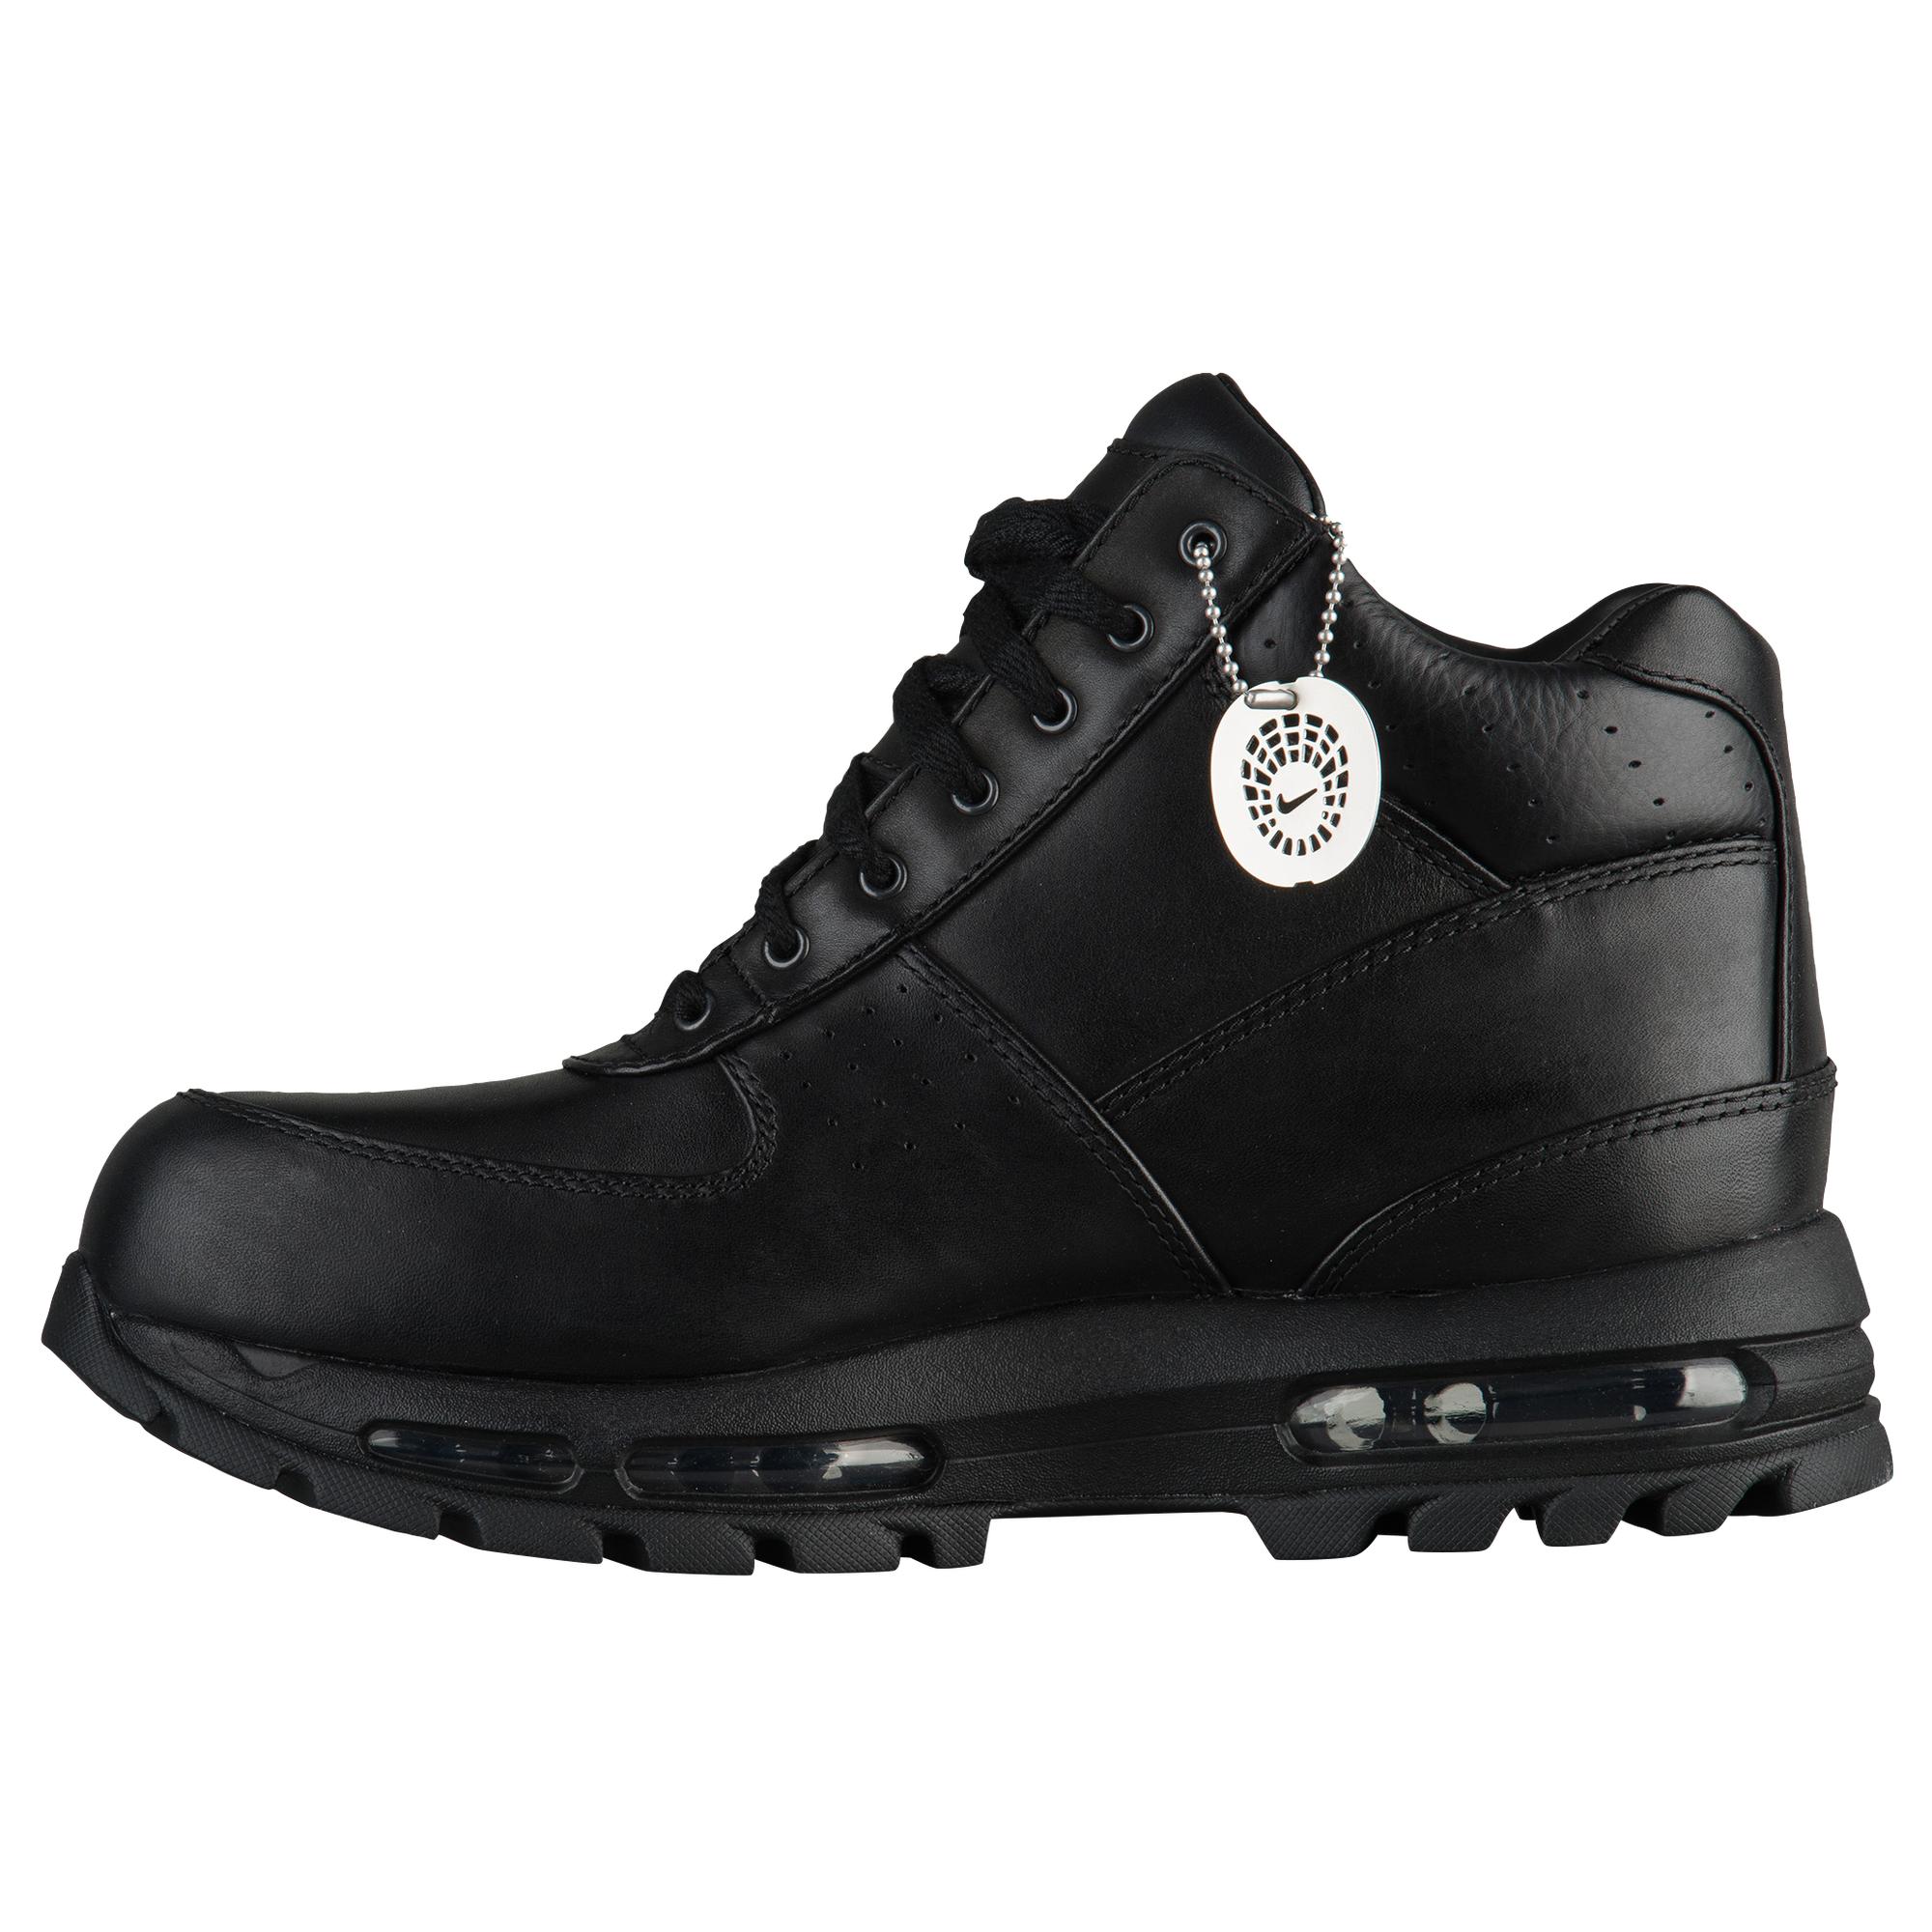 Nike Leather Air Max Goadome Boots in Black,Black,Black (Black) for Men -  Save 40% | Lyst